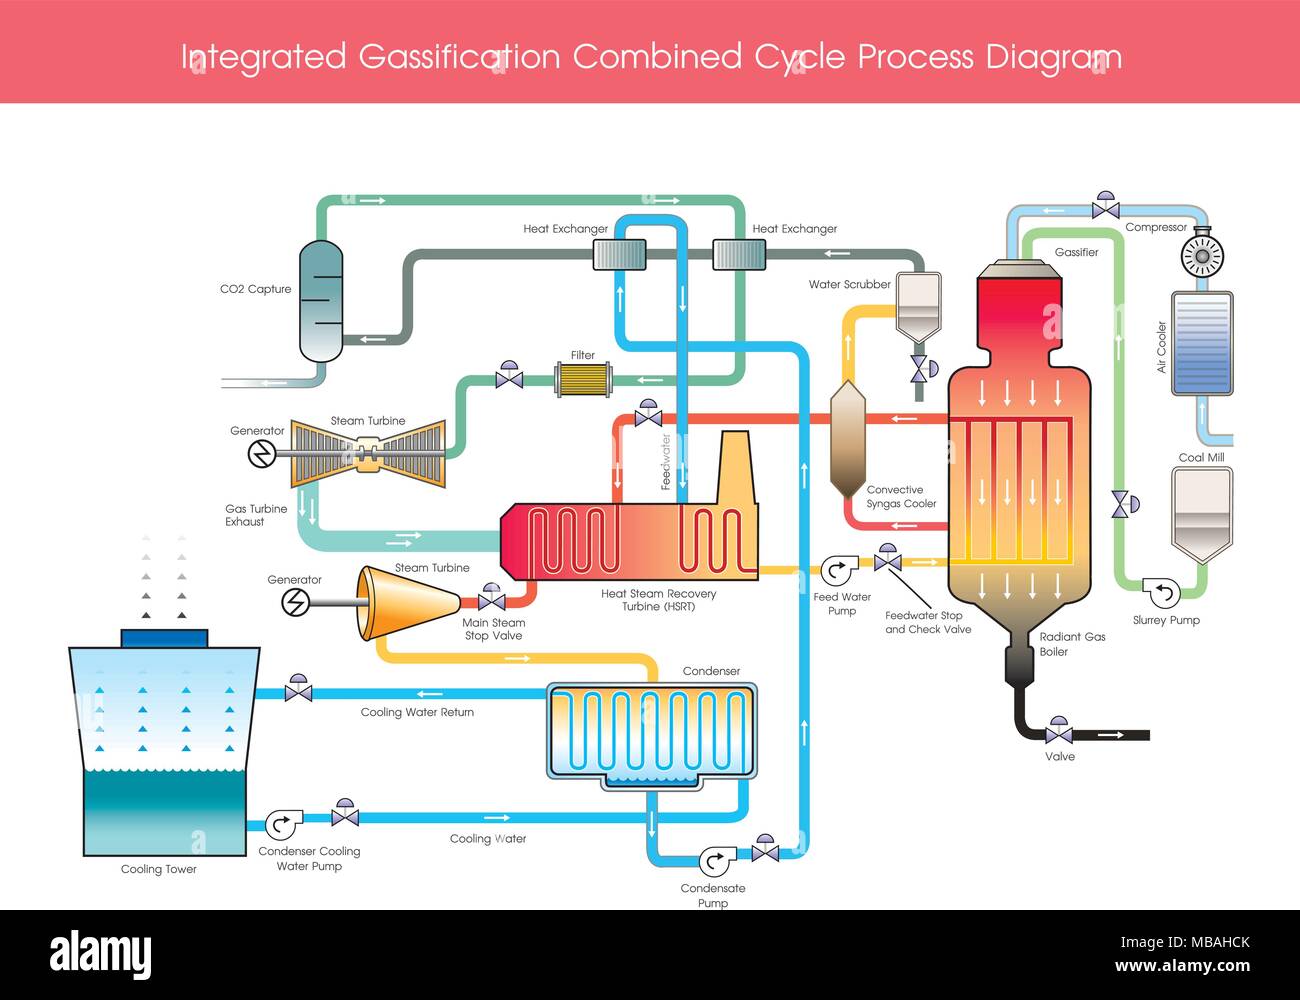 Integrated Gasification Combined Cycle Process Diagram. Wood gas is a ...